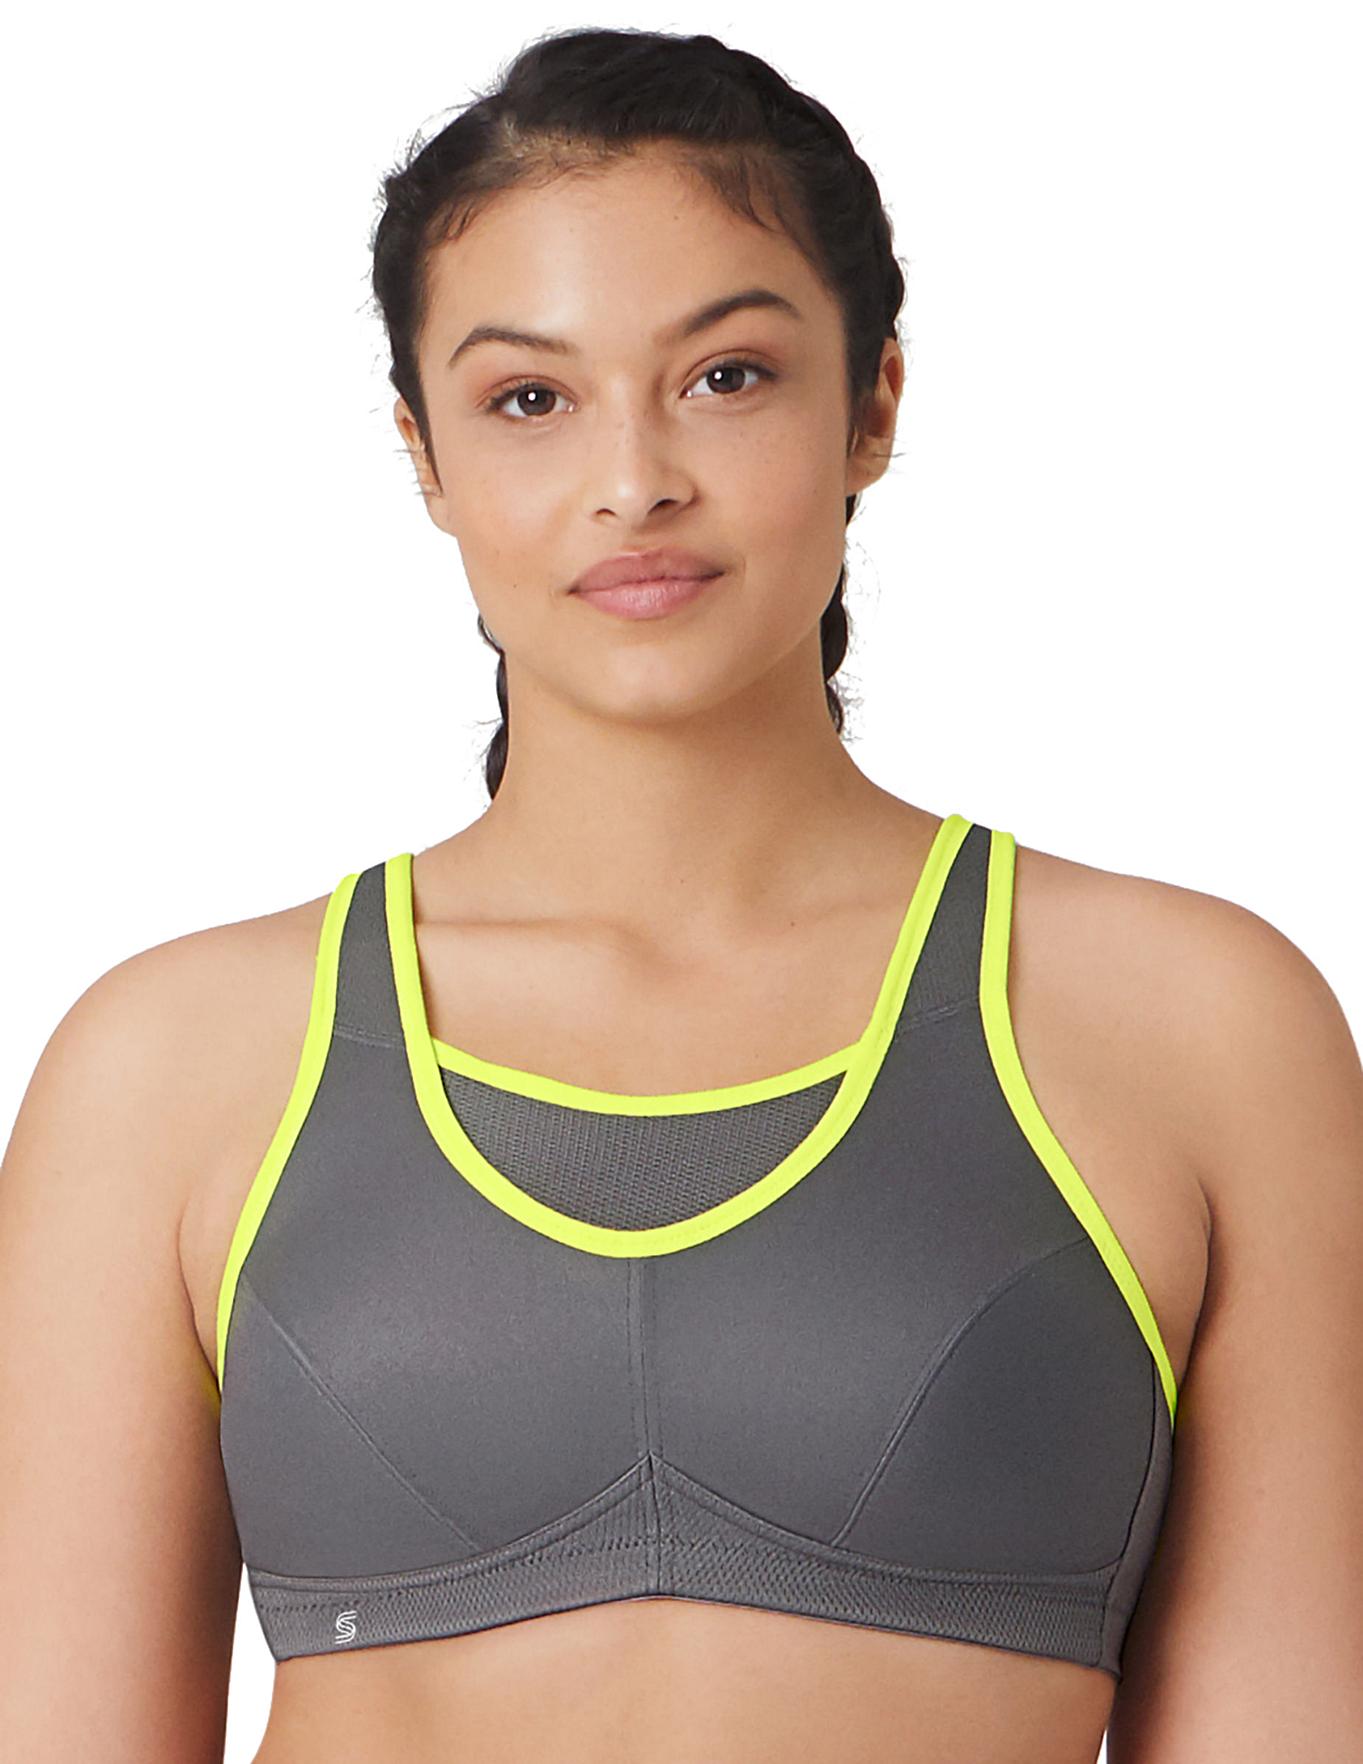 Review of the Glamorise Sport No Bounce Cami Sports Bra 